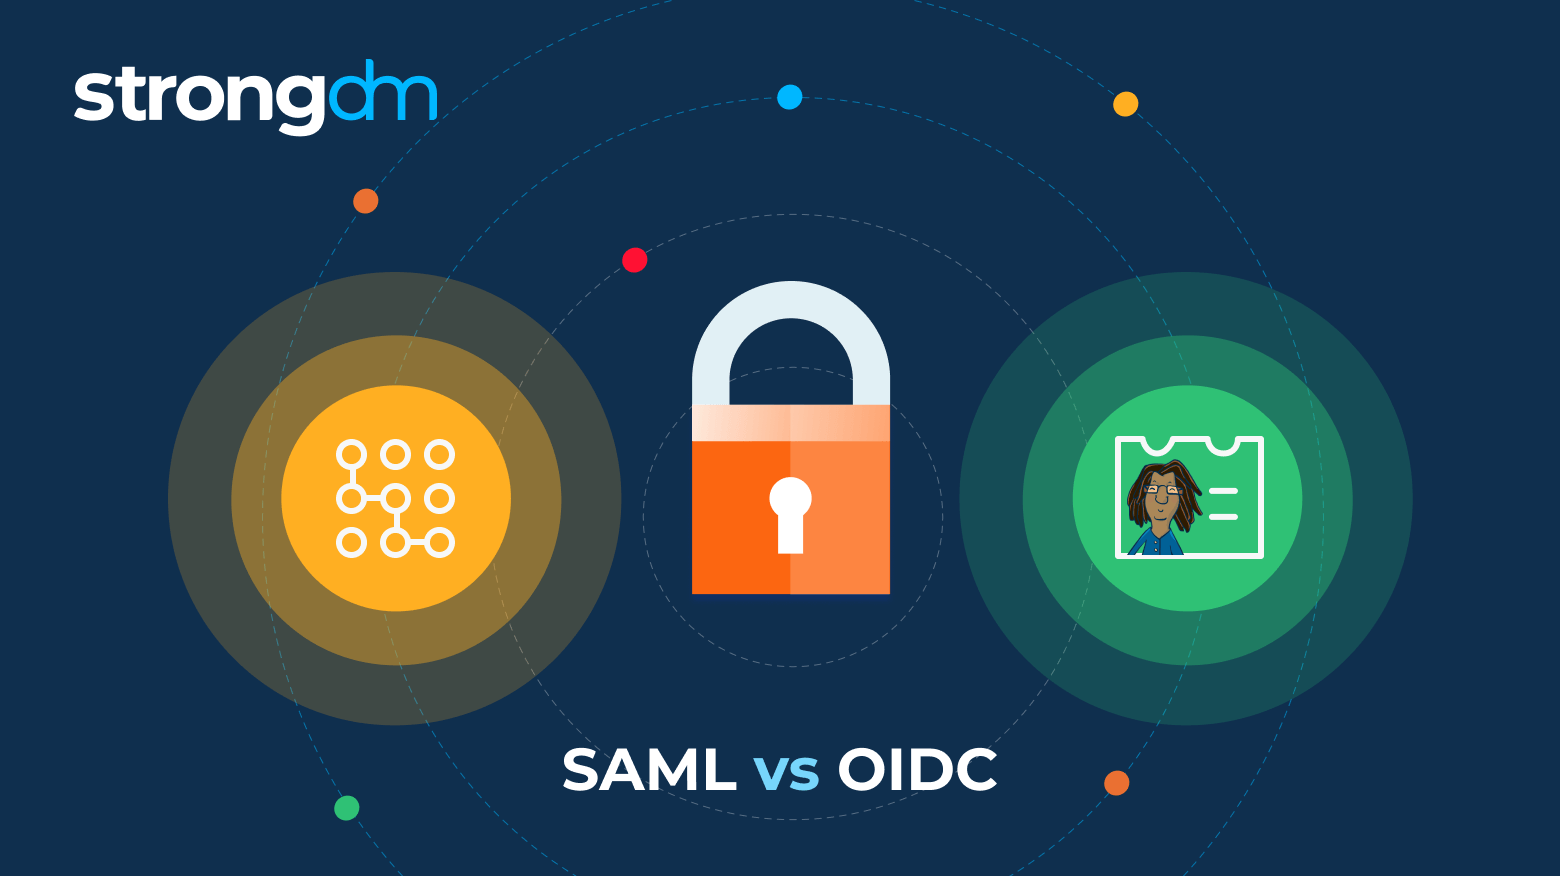 The difference between SAML vs OIDC